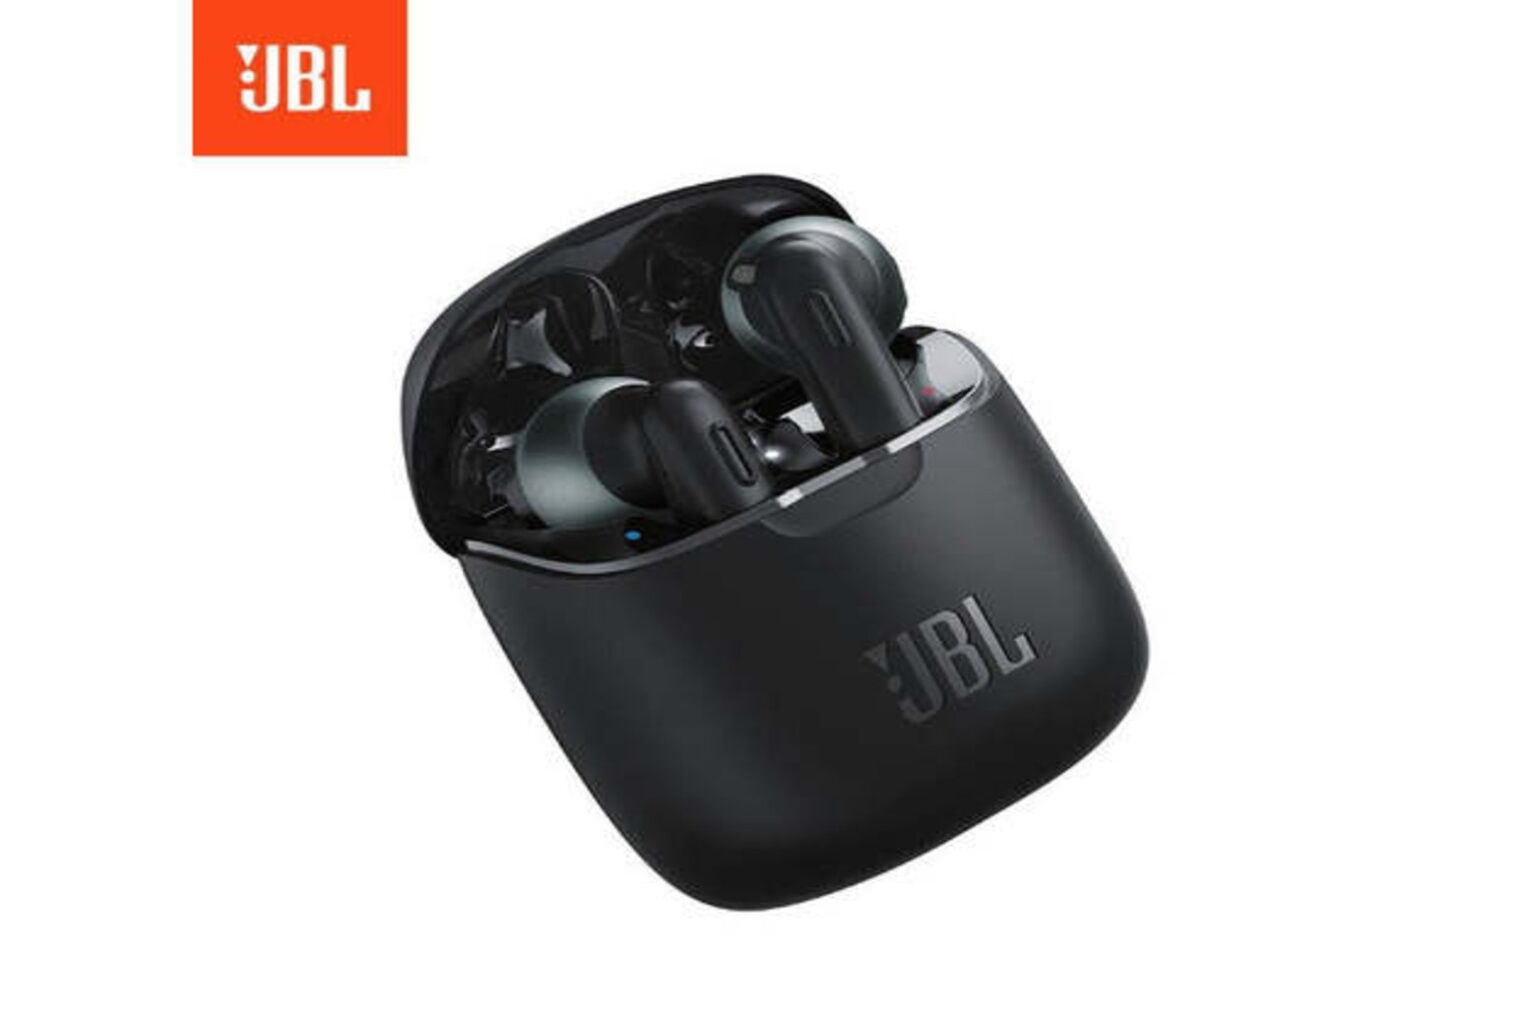 iWant a pair of JBL wireless earbuds for $38.